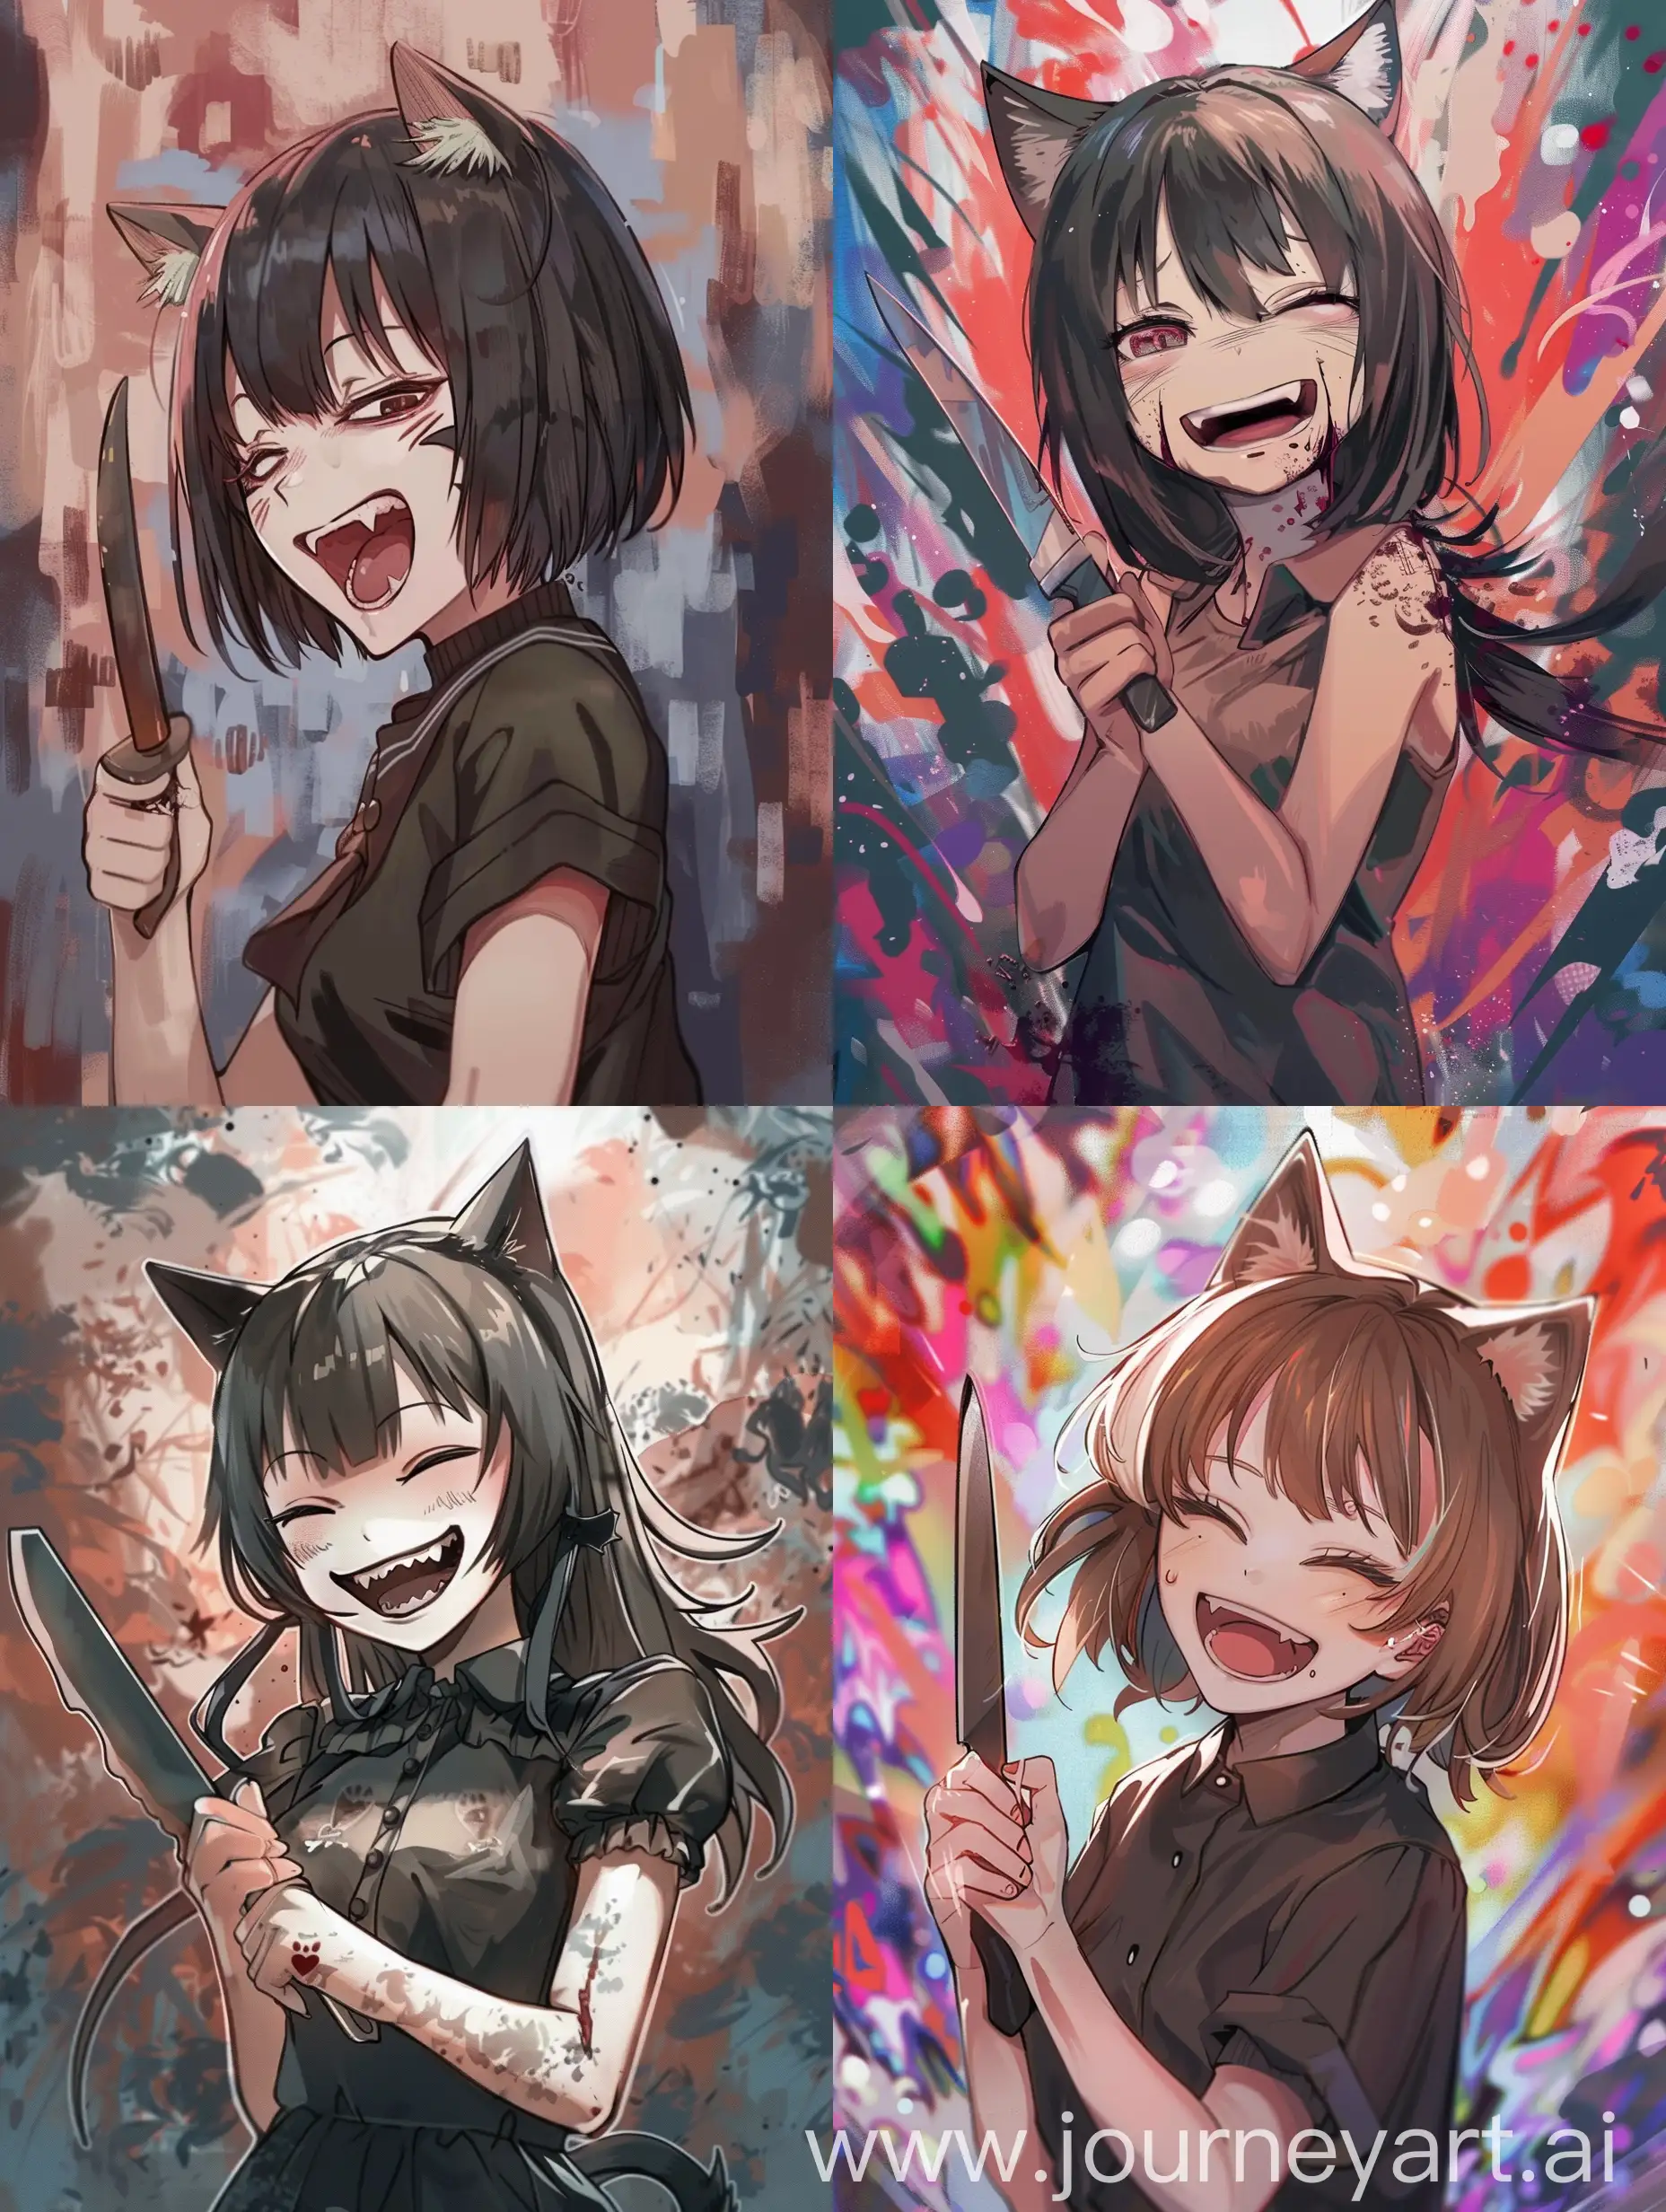 anime girl with cat ears laughing, she holding a knife, with abstract background